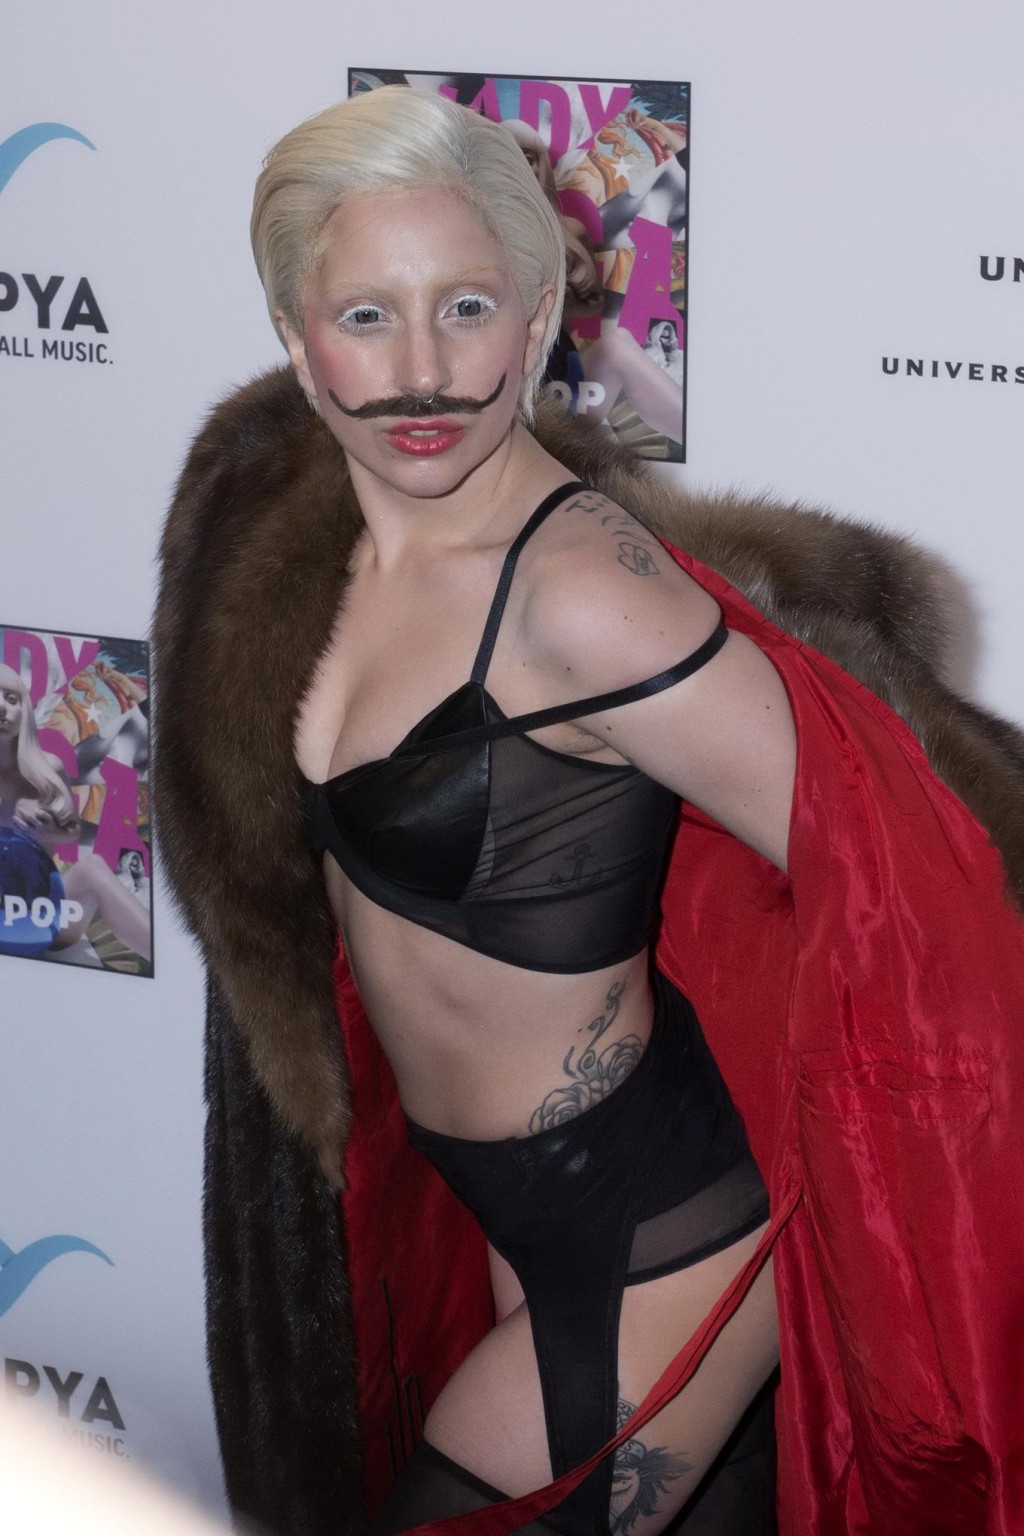 Lady Gaga wearing lingerie and fake moustache at her album promotion in Berlin #75215042